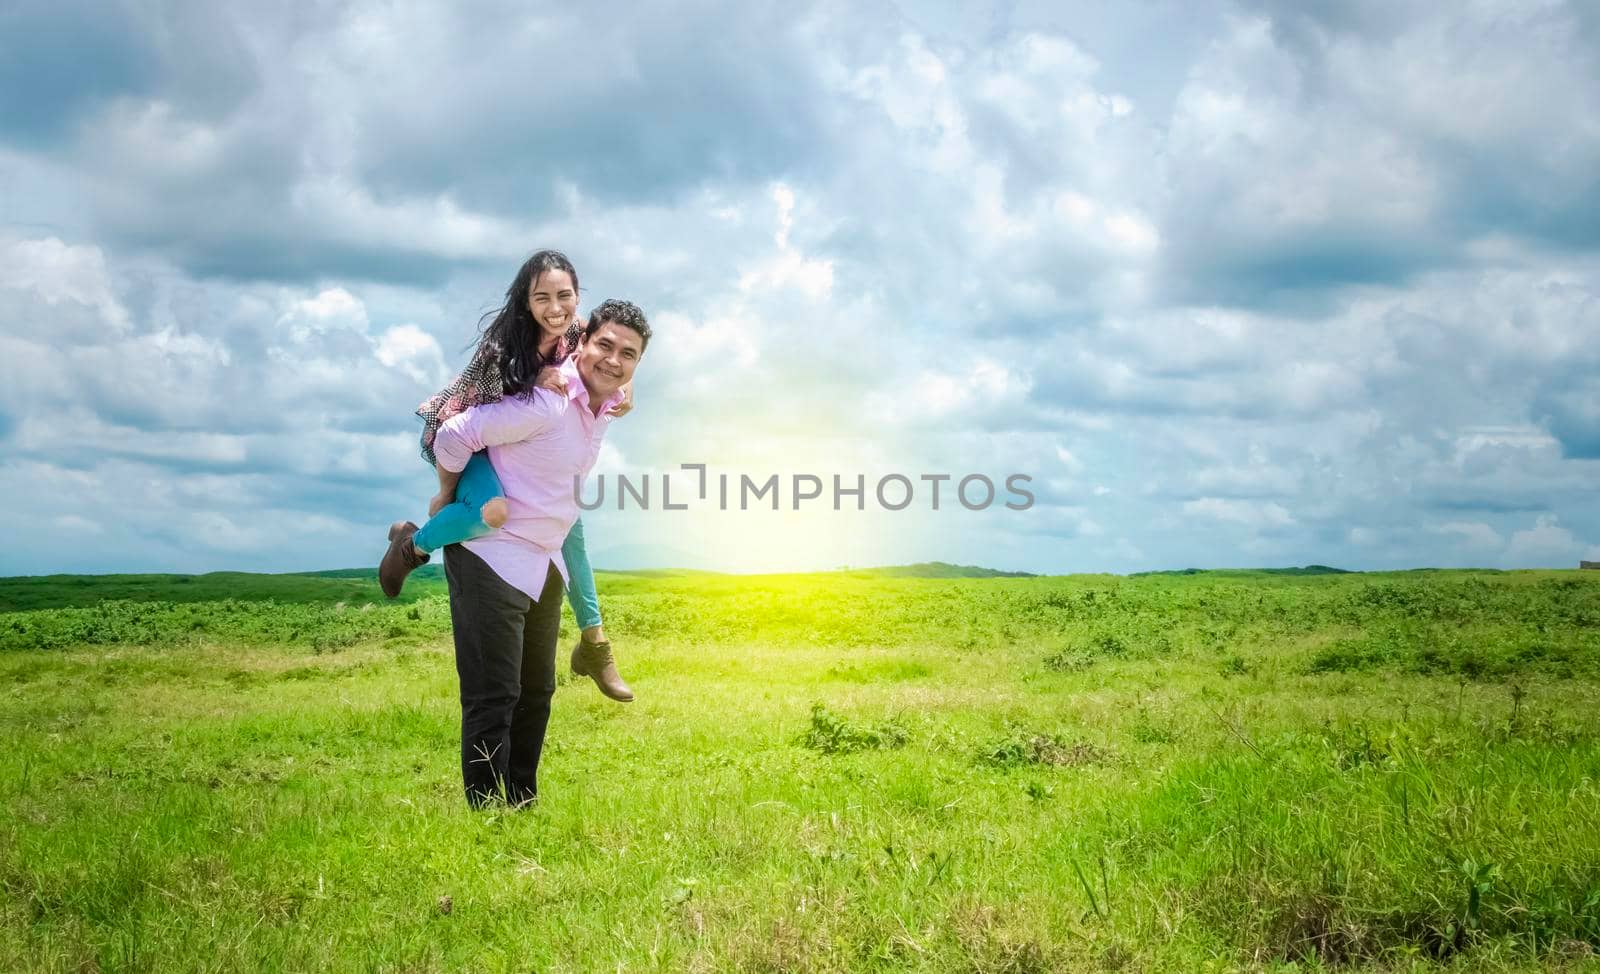 Happy couple in love in the field, happy man carrying his girlfriend in the field